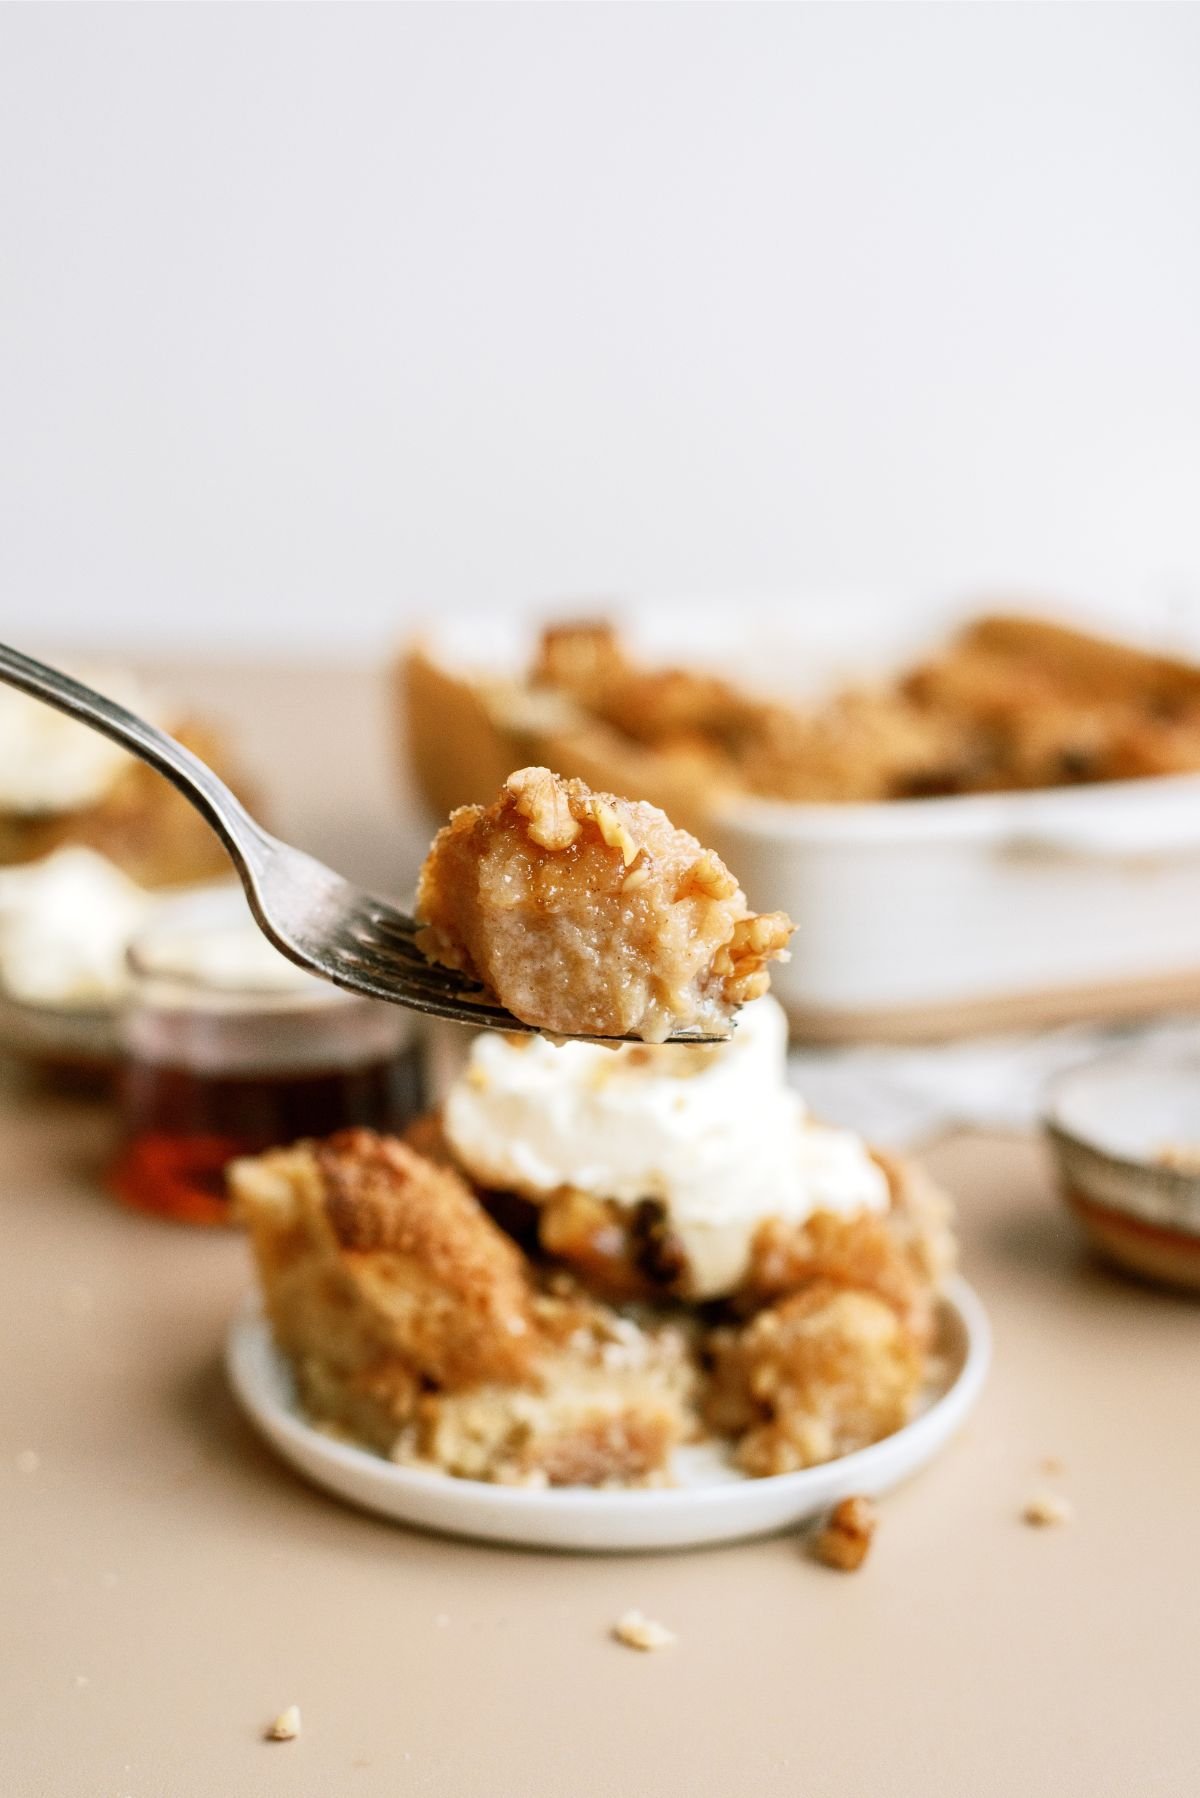 A serving of Brown Sugar and Maple Bread Pudding on a plate with a fork holding up a bite